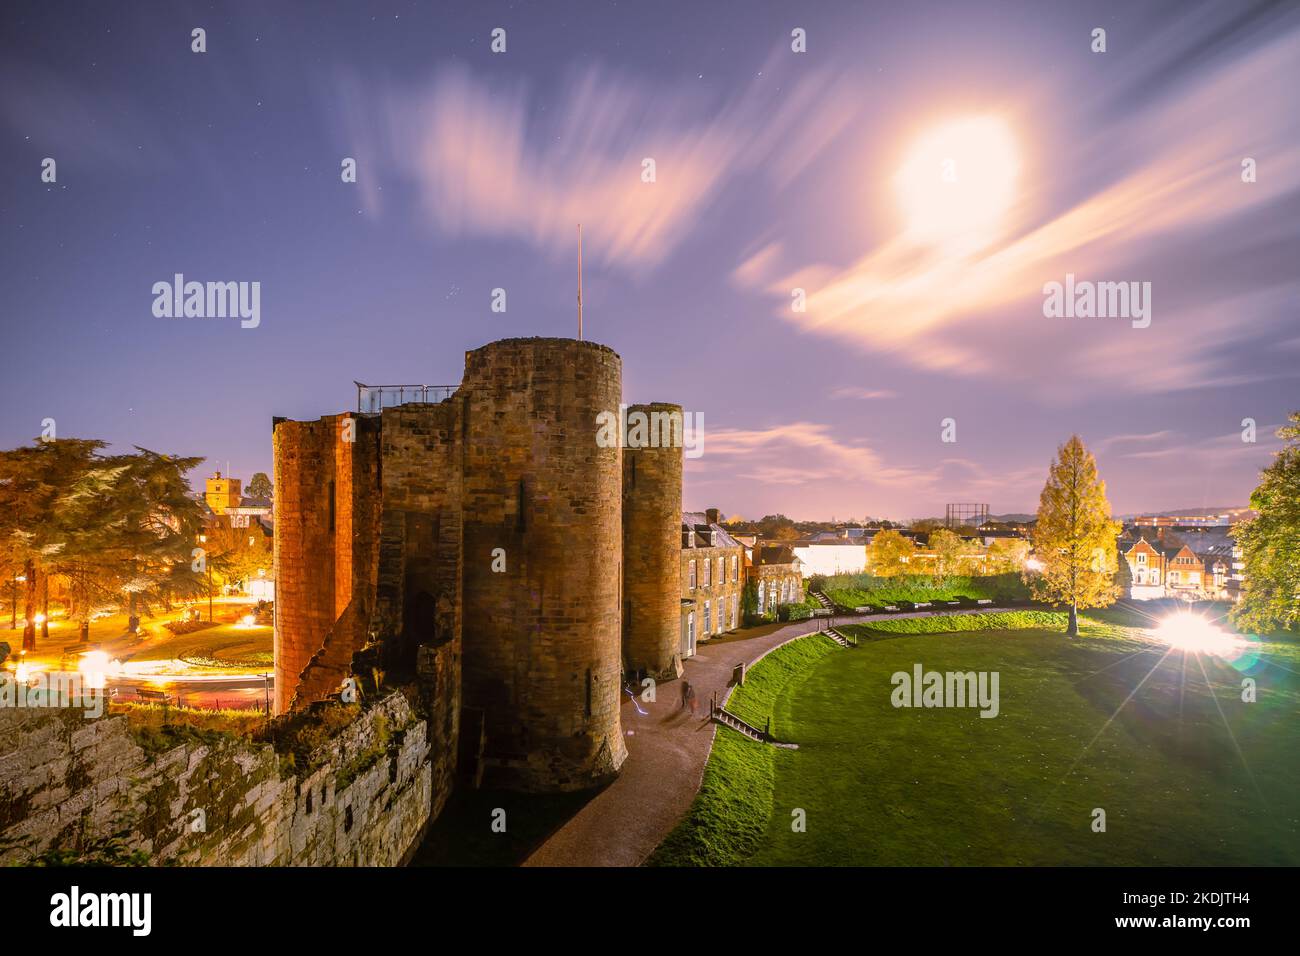 Tonbridge, Kent, England. 06 November 2022. The Medieval 13th Century Tonbridge Castle viewed from the Motte, lit by moonlight on a starry night at dusk in this market town in Kent. ©Sarah Mott / Alamy Live News. Stock Photo